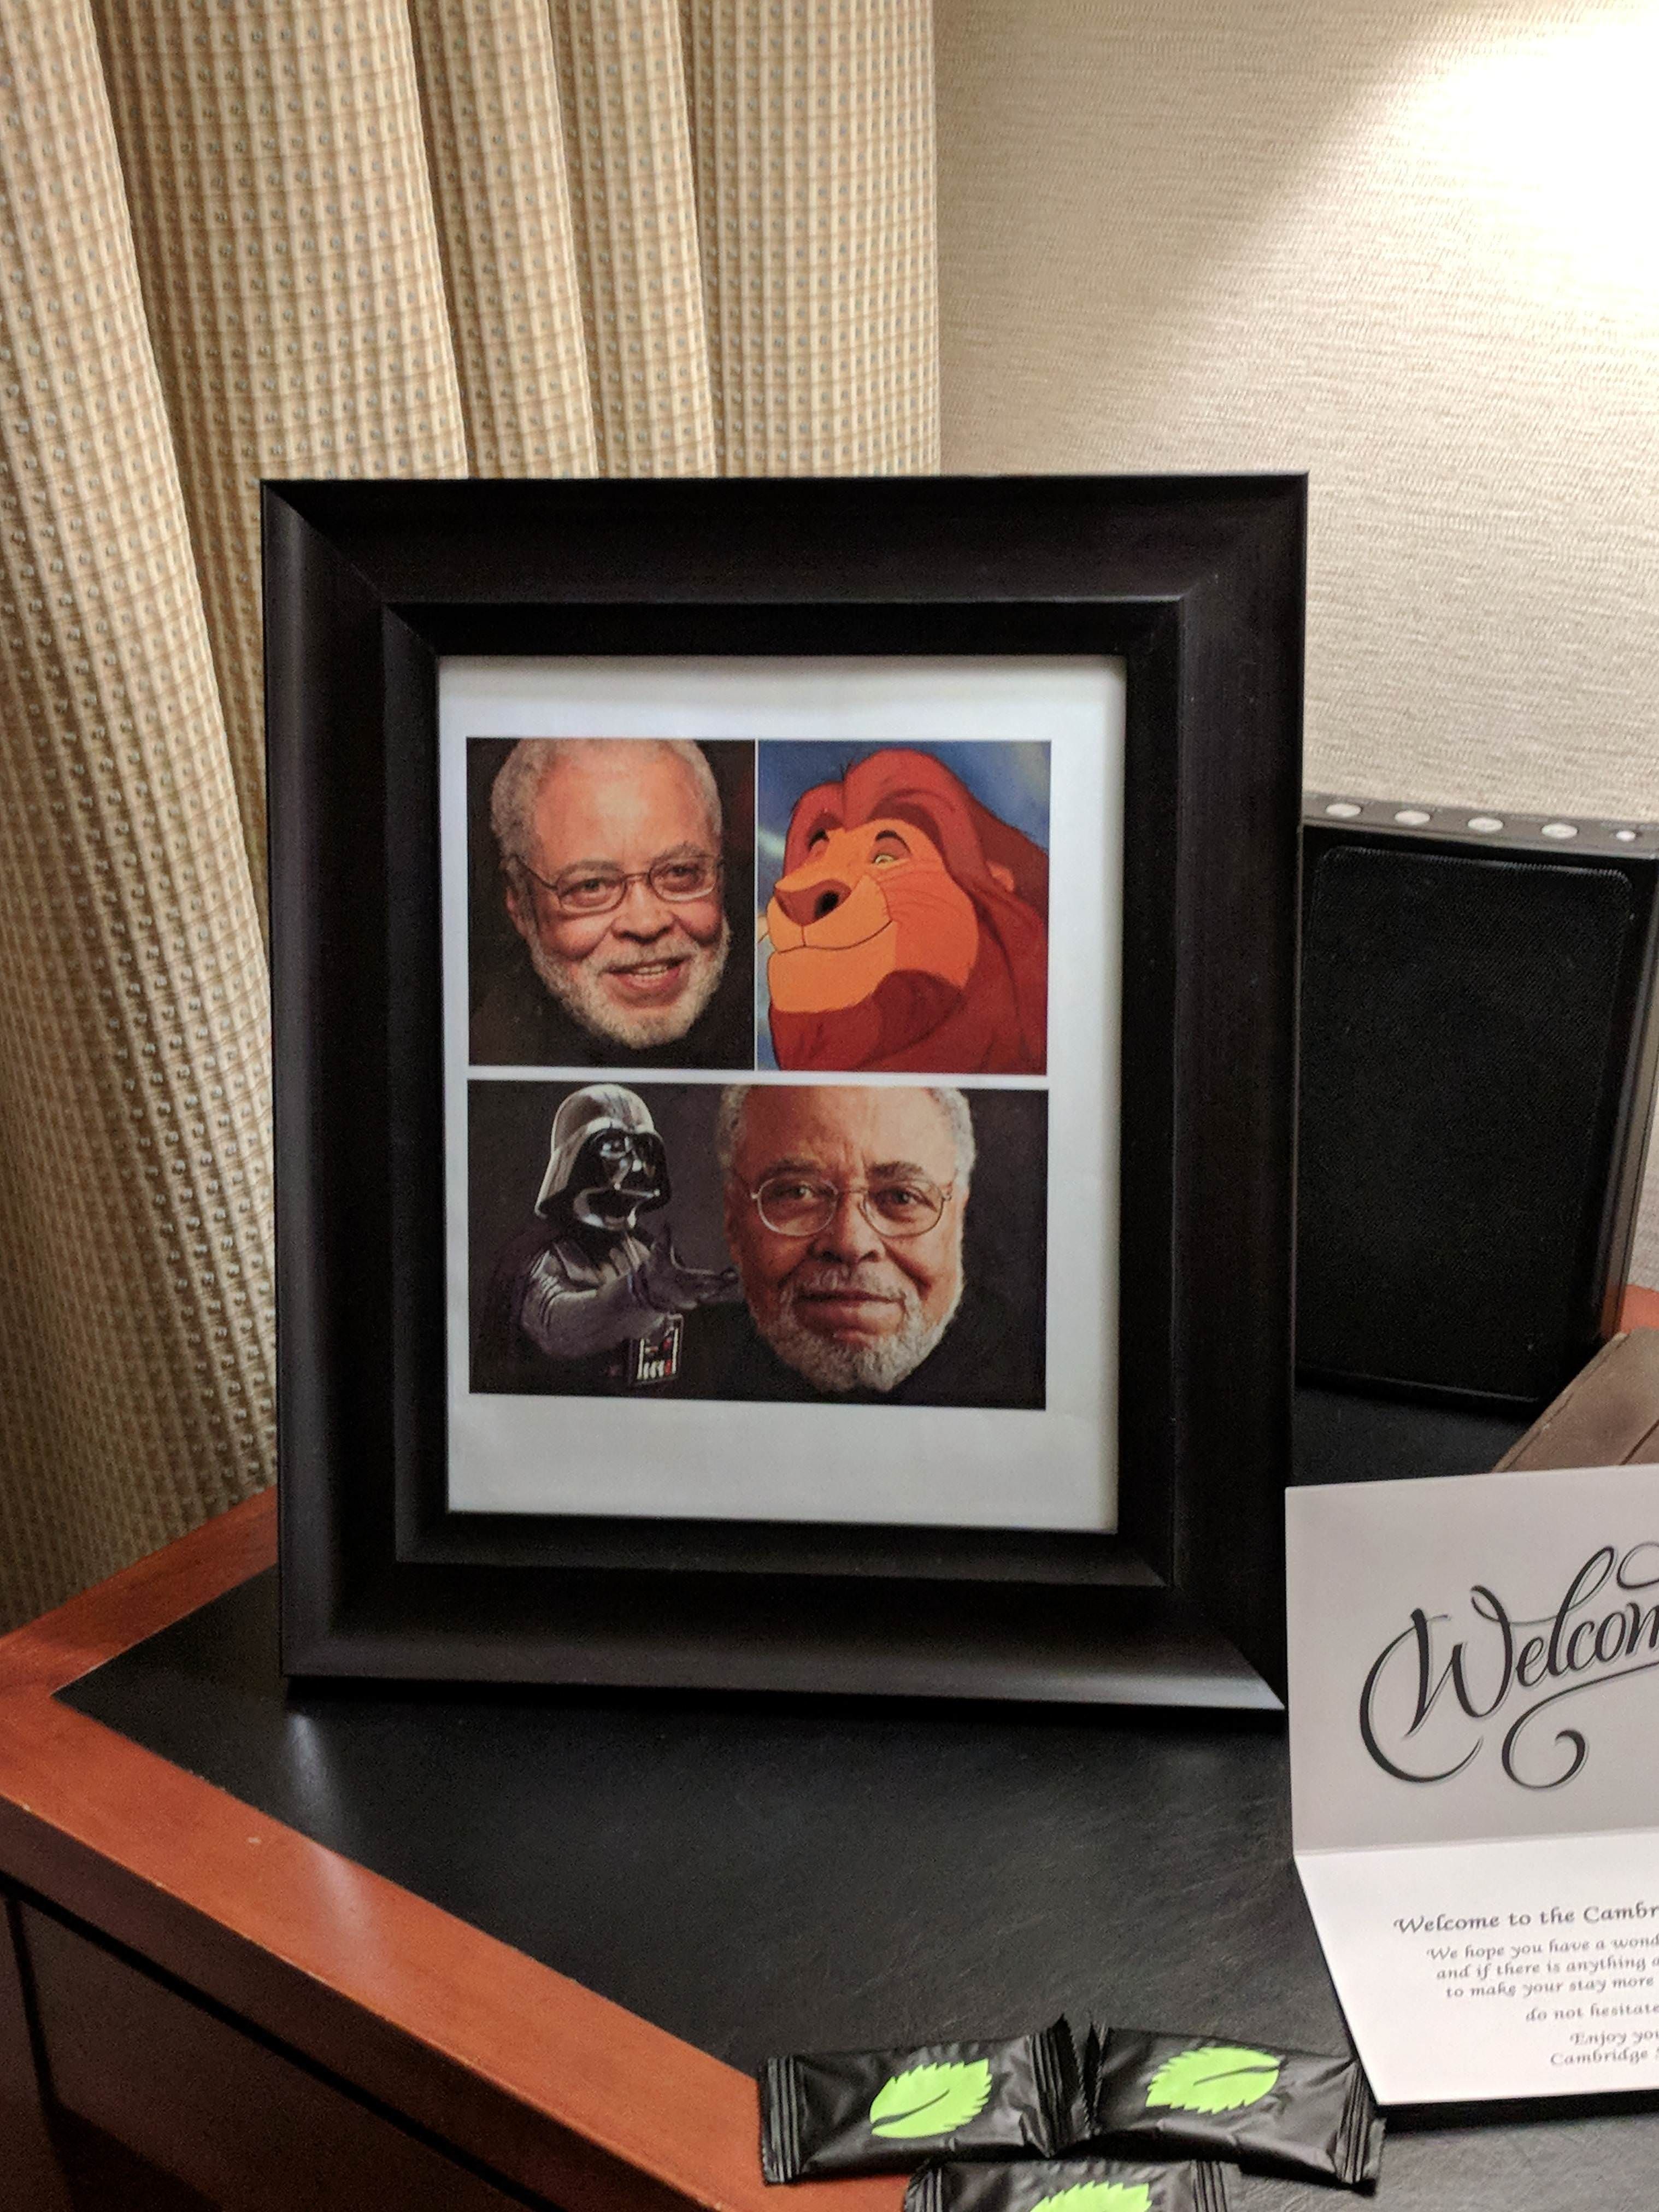 Requested a photo of James Earl Jones for my hotel room. 5 star customer service